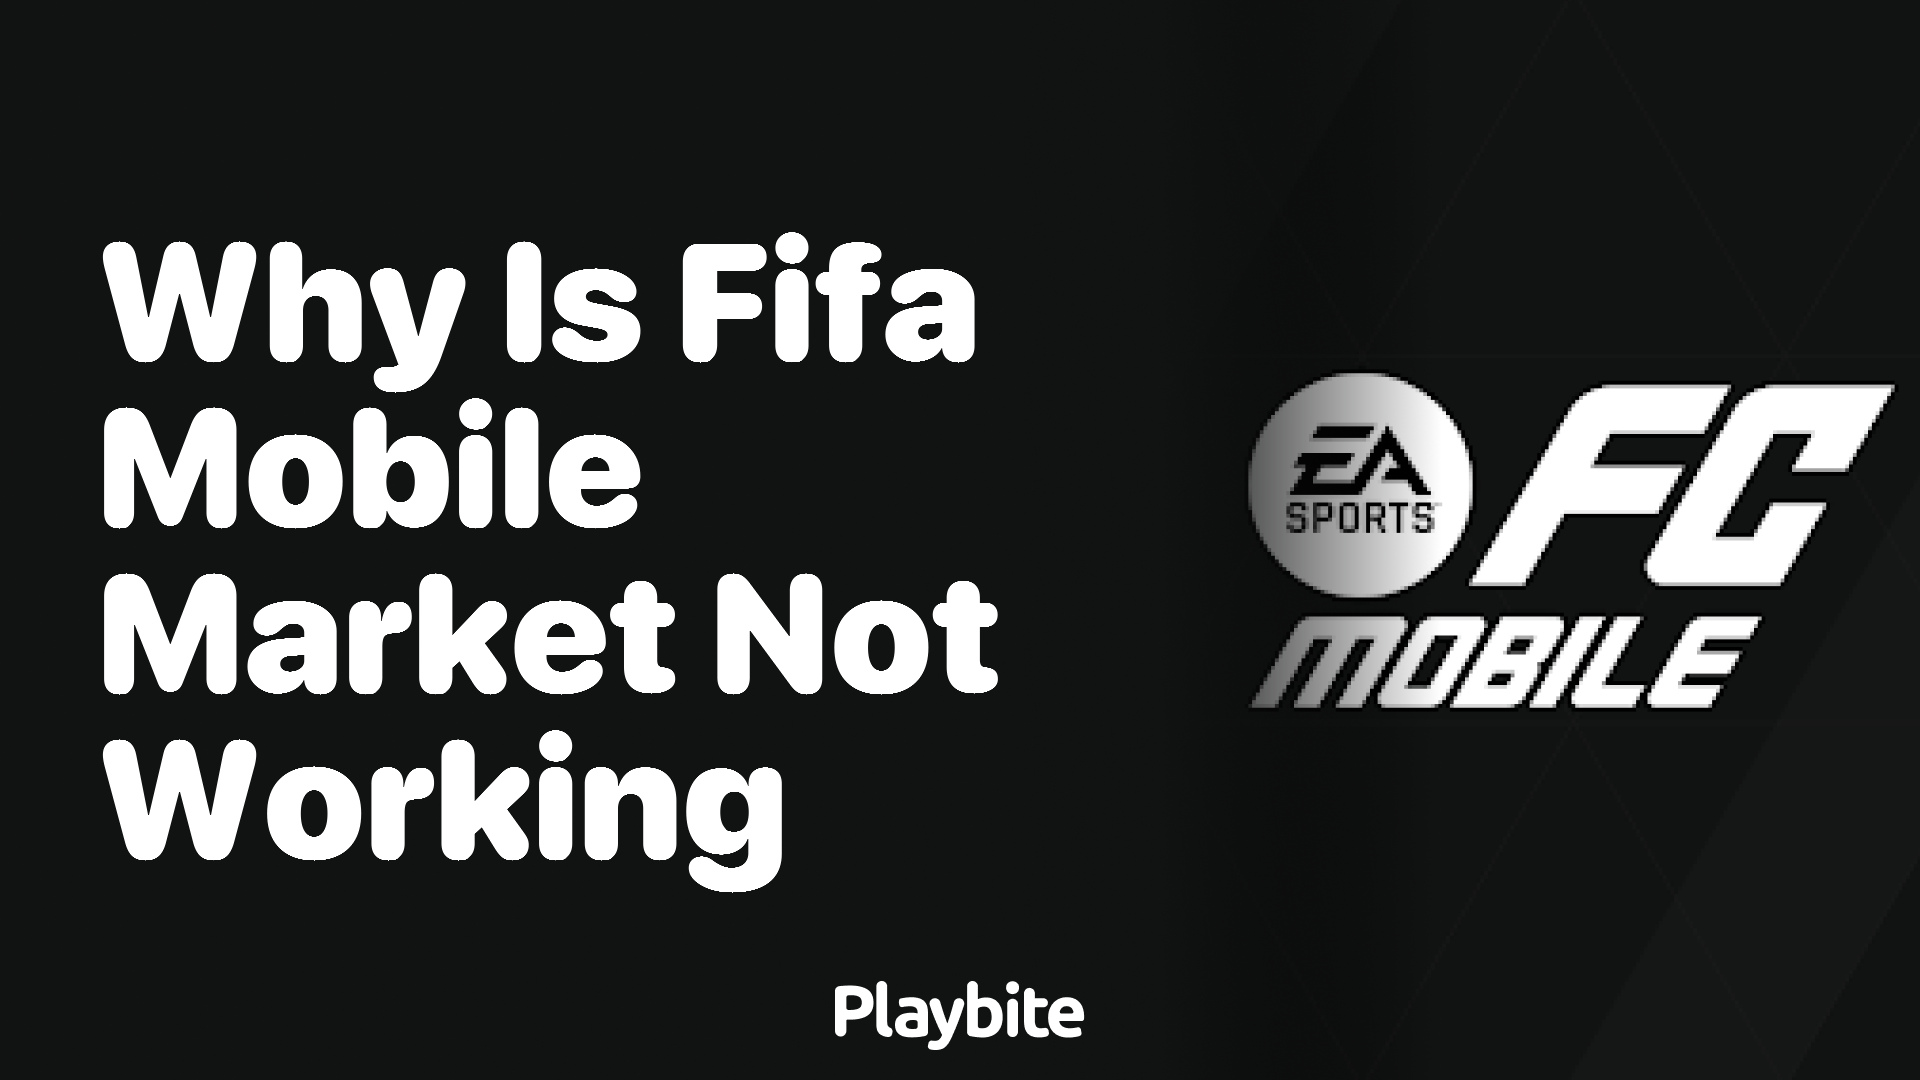 Why is the FIFA Mobile Market not Working?